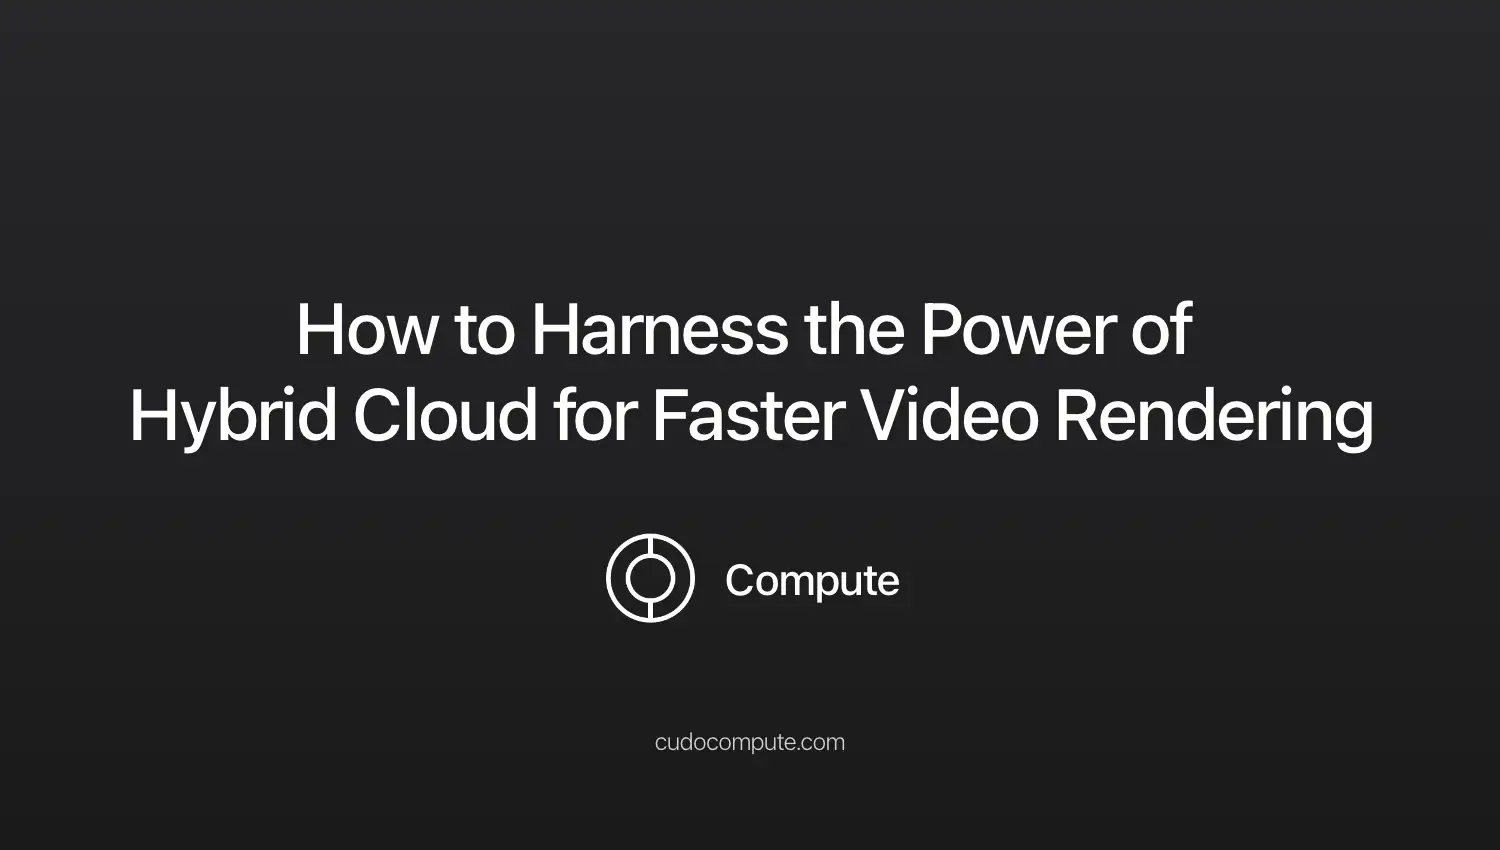 How to Harness the Power of Hybrid Cloud for Faster Video Rendering cover photo